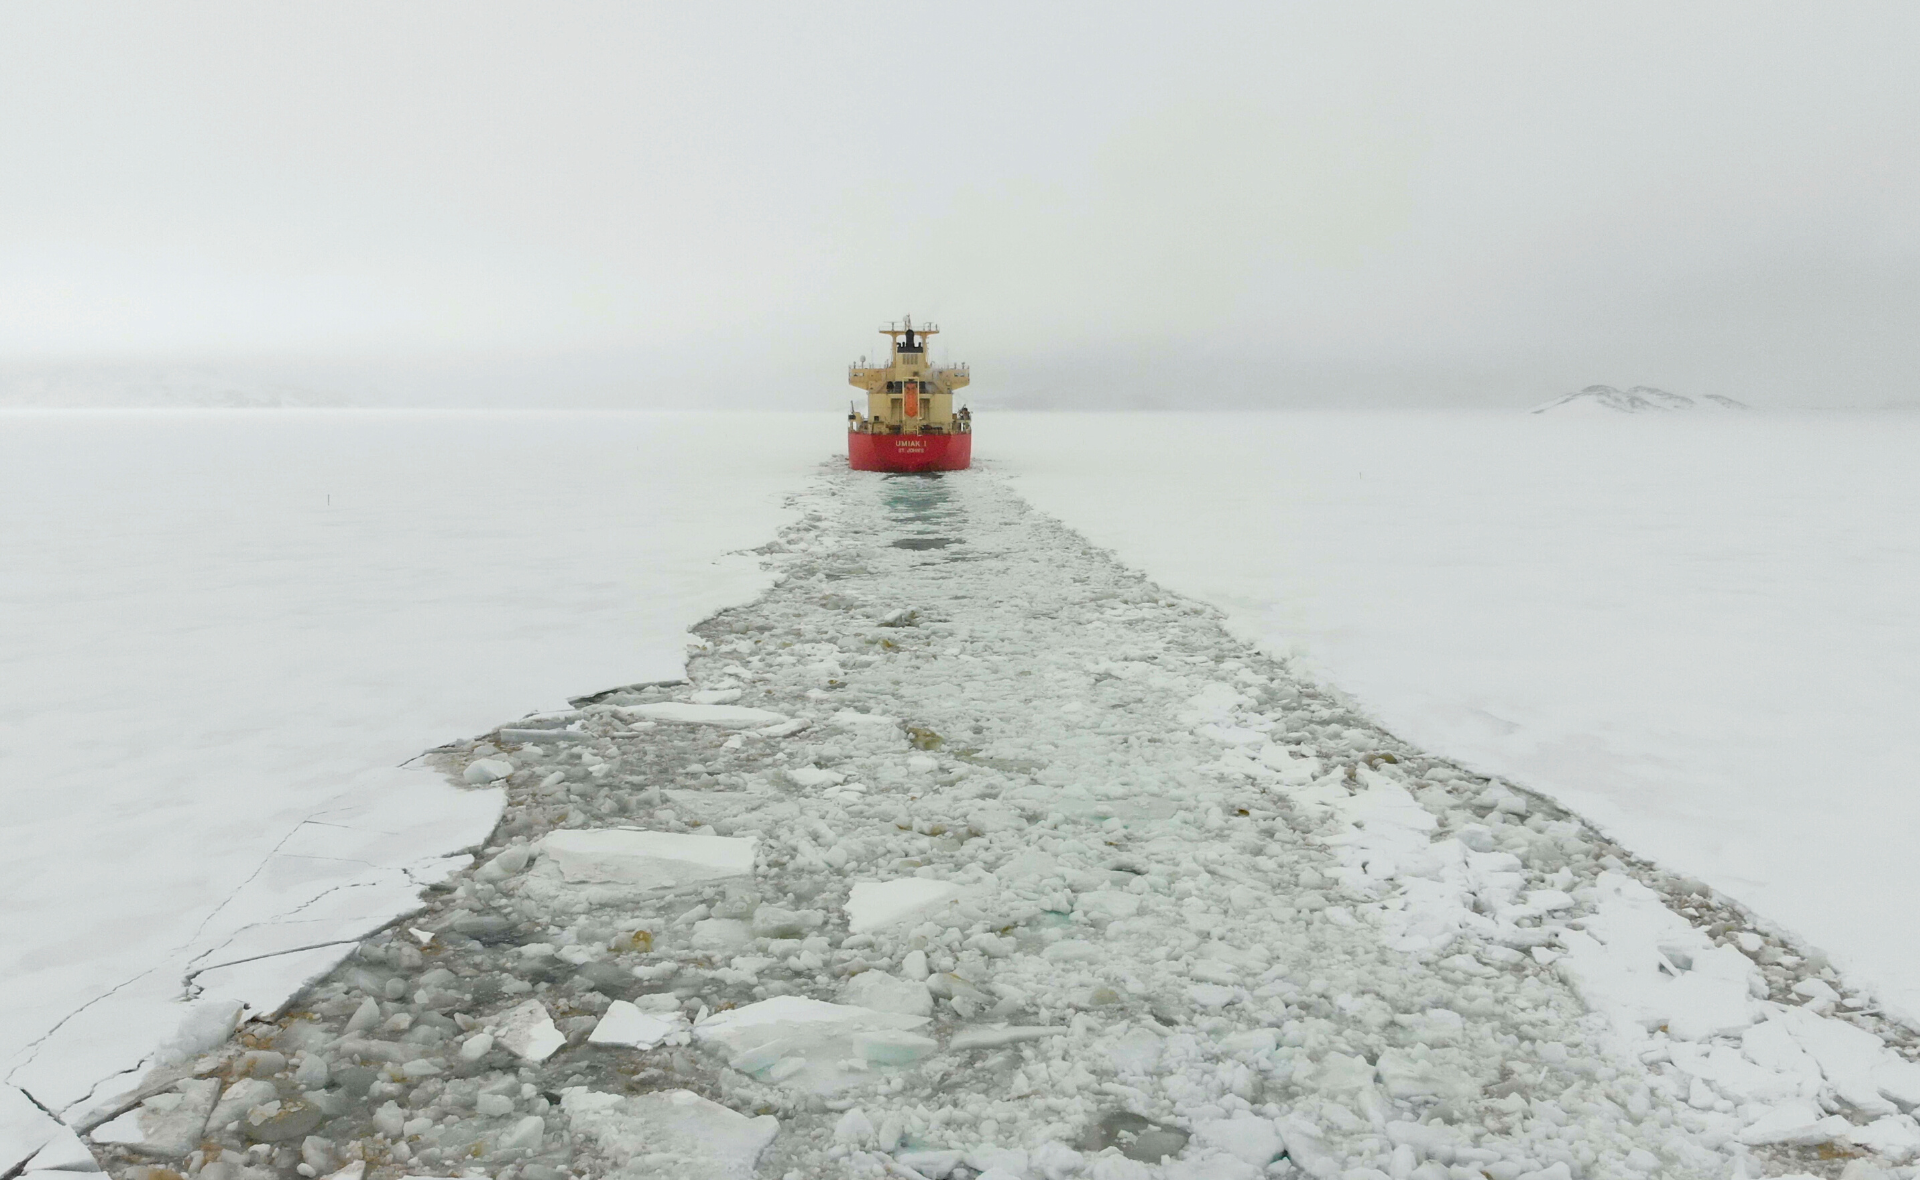 A boat crosses a large area of frozen water, leaving a trail of ice pieces behind.